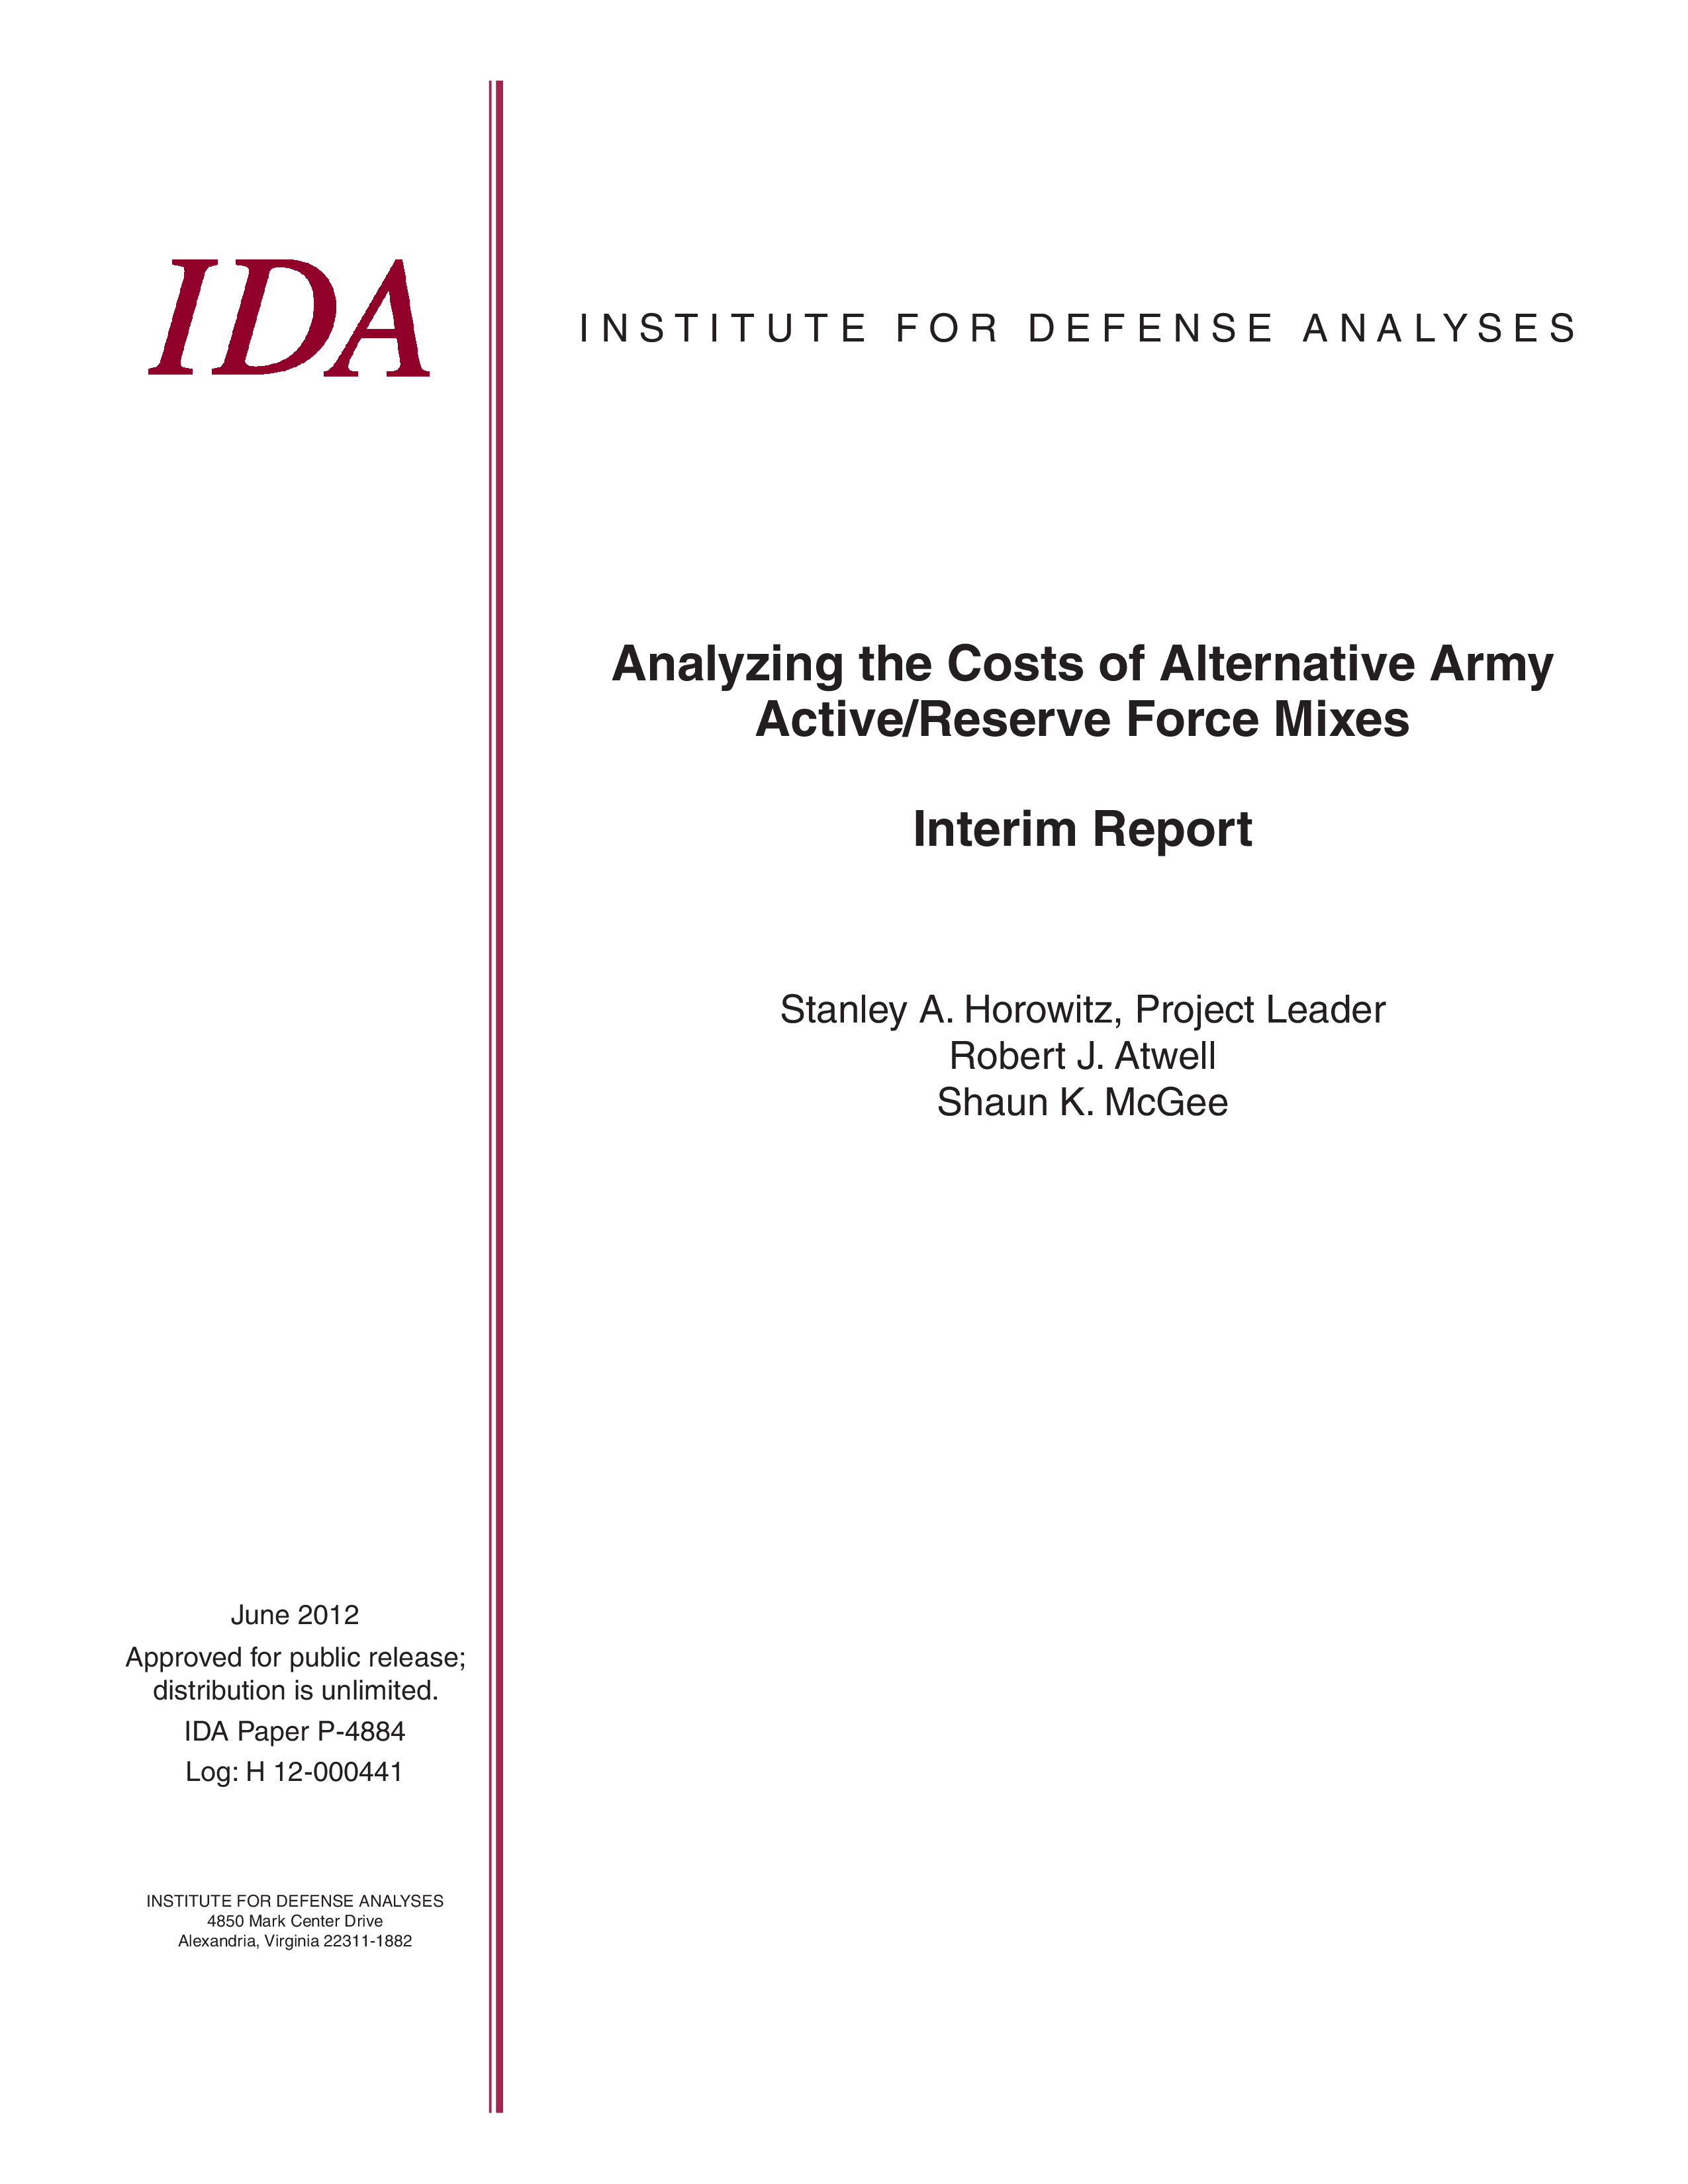 Analyzing the Costs of Alternative Army Active/Reserve Force Mixes Interim Repor